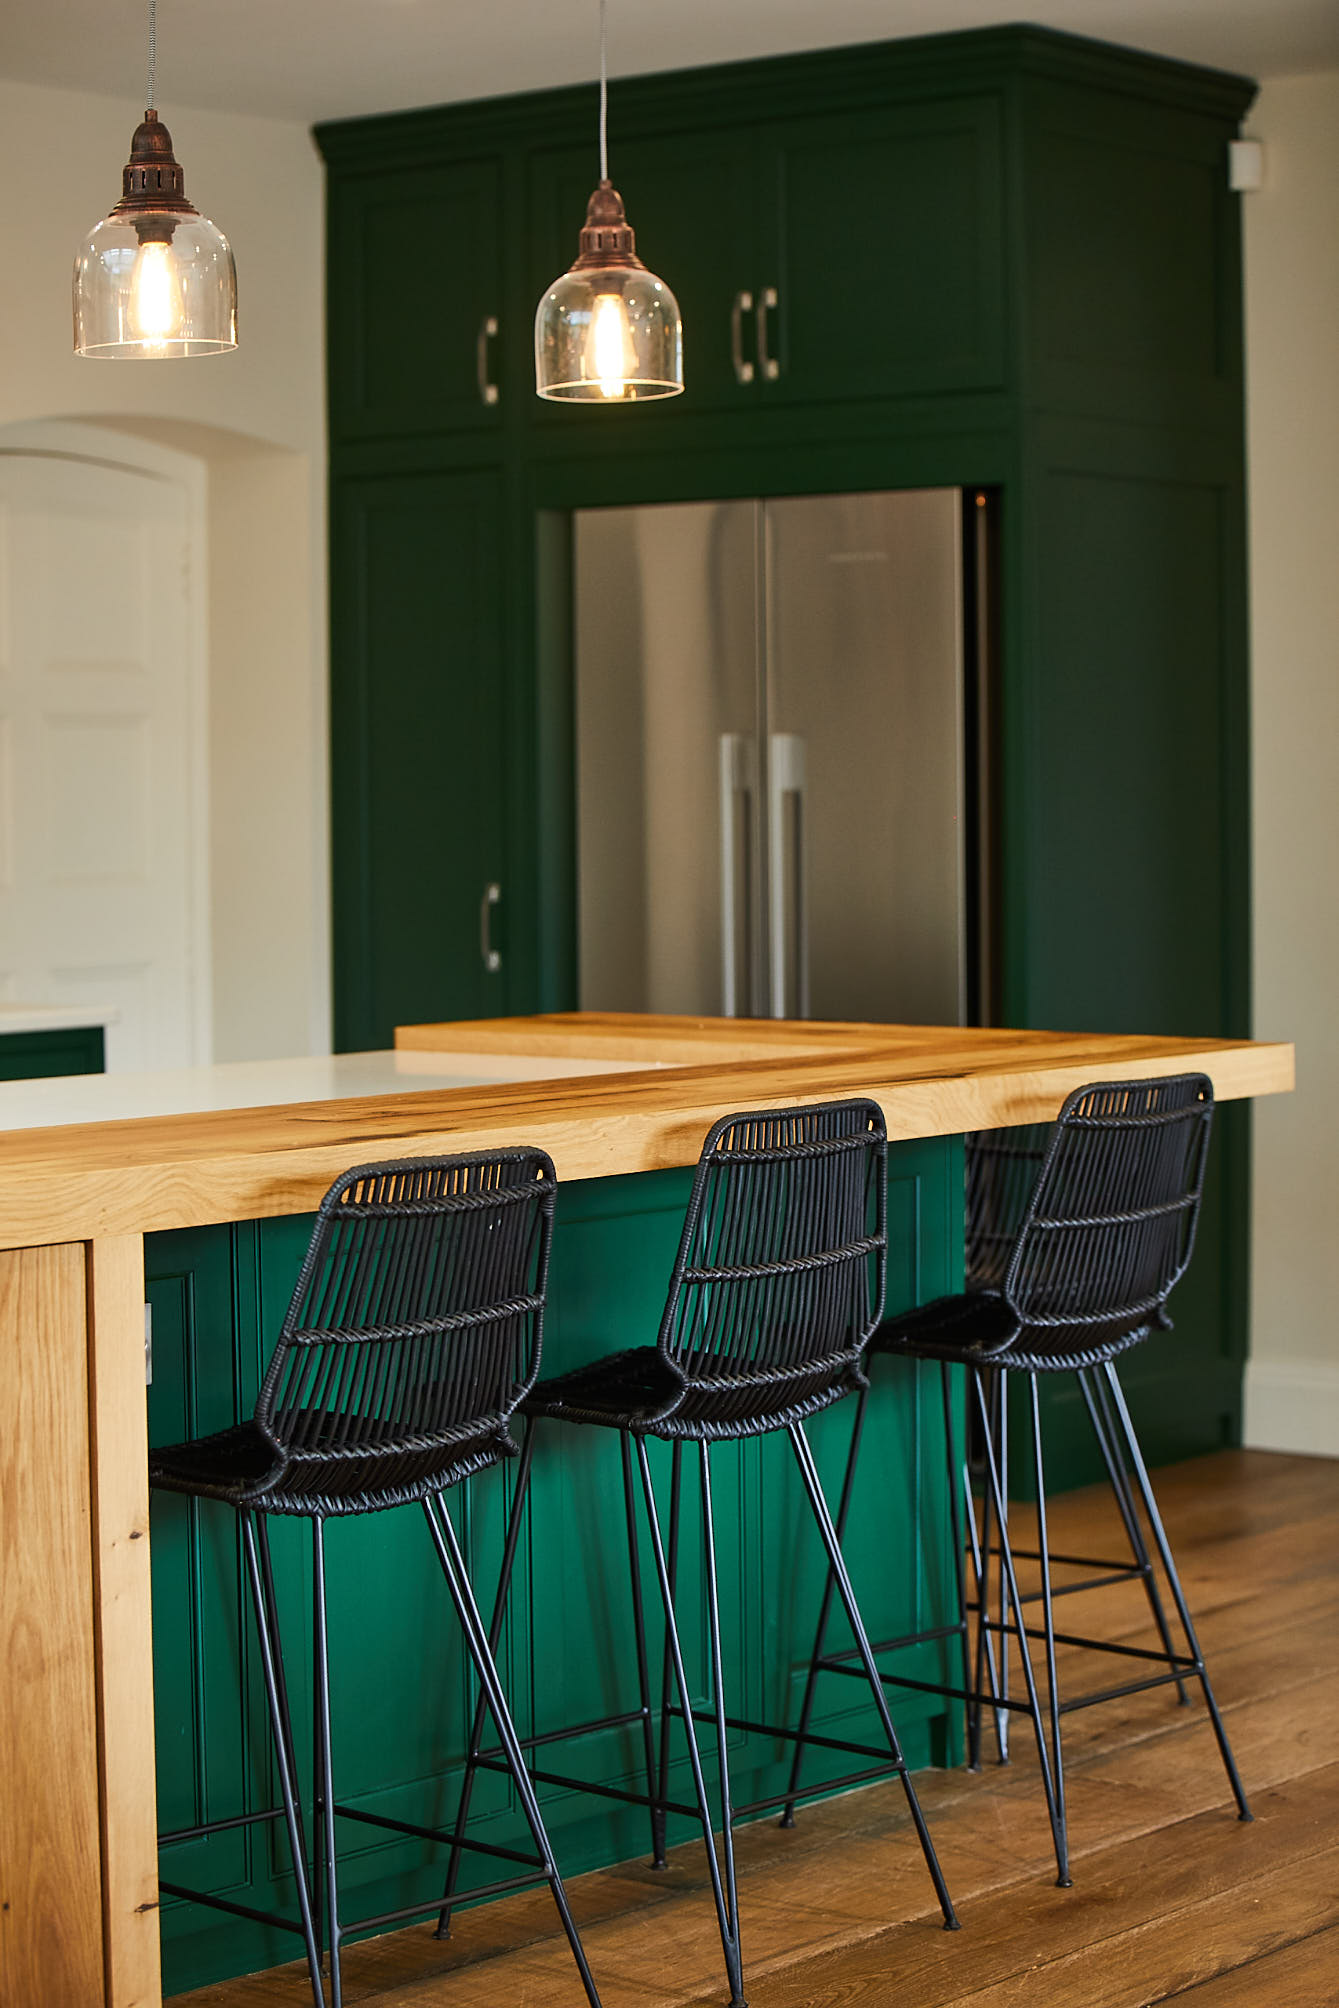 Black bar stools sit under green kitchen island with glass pendant lights above